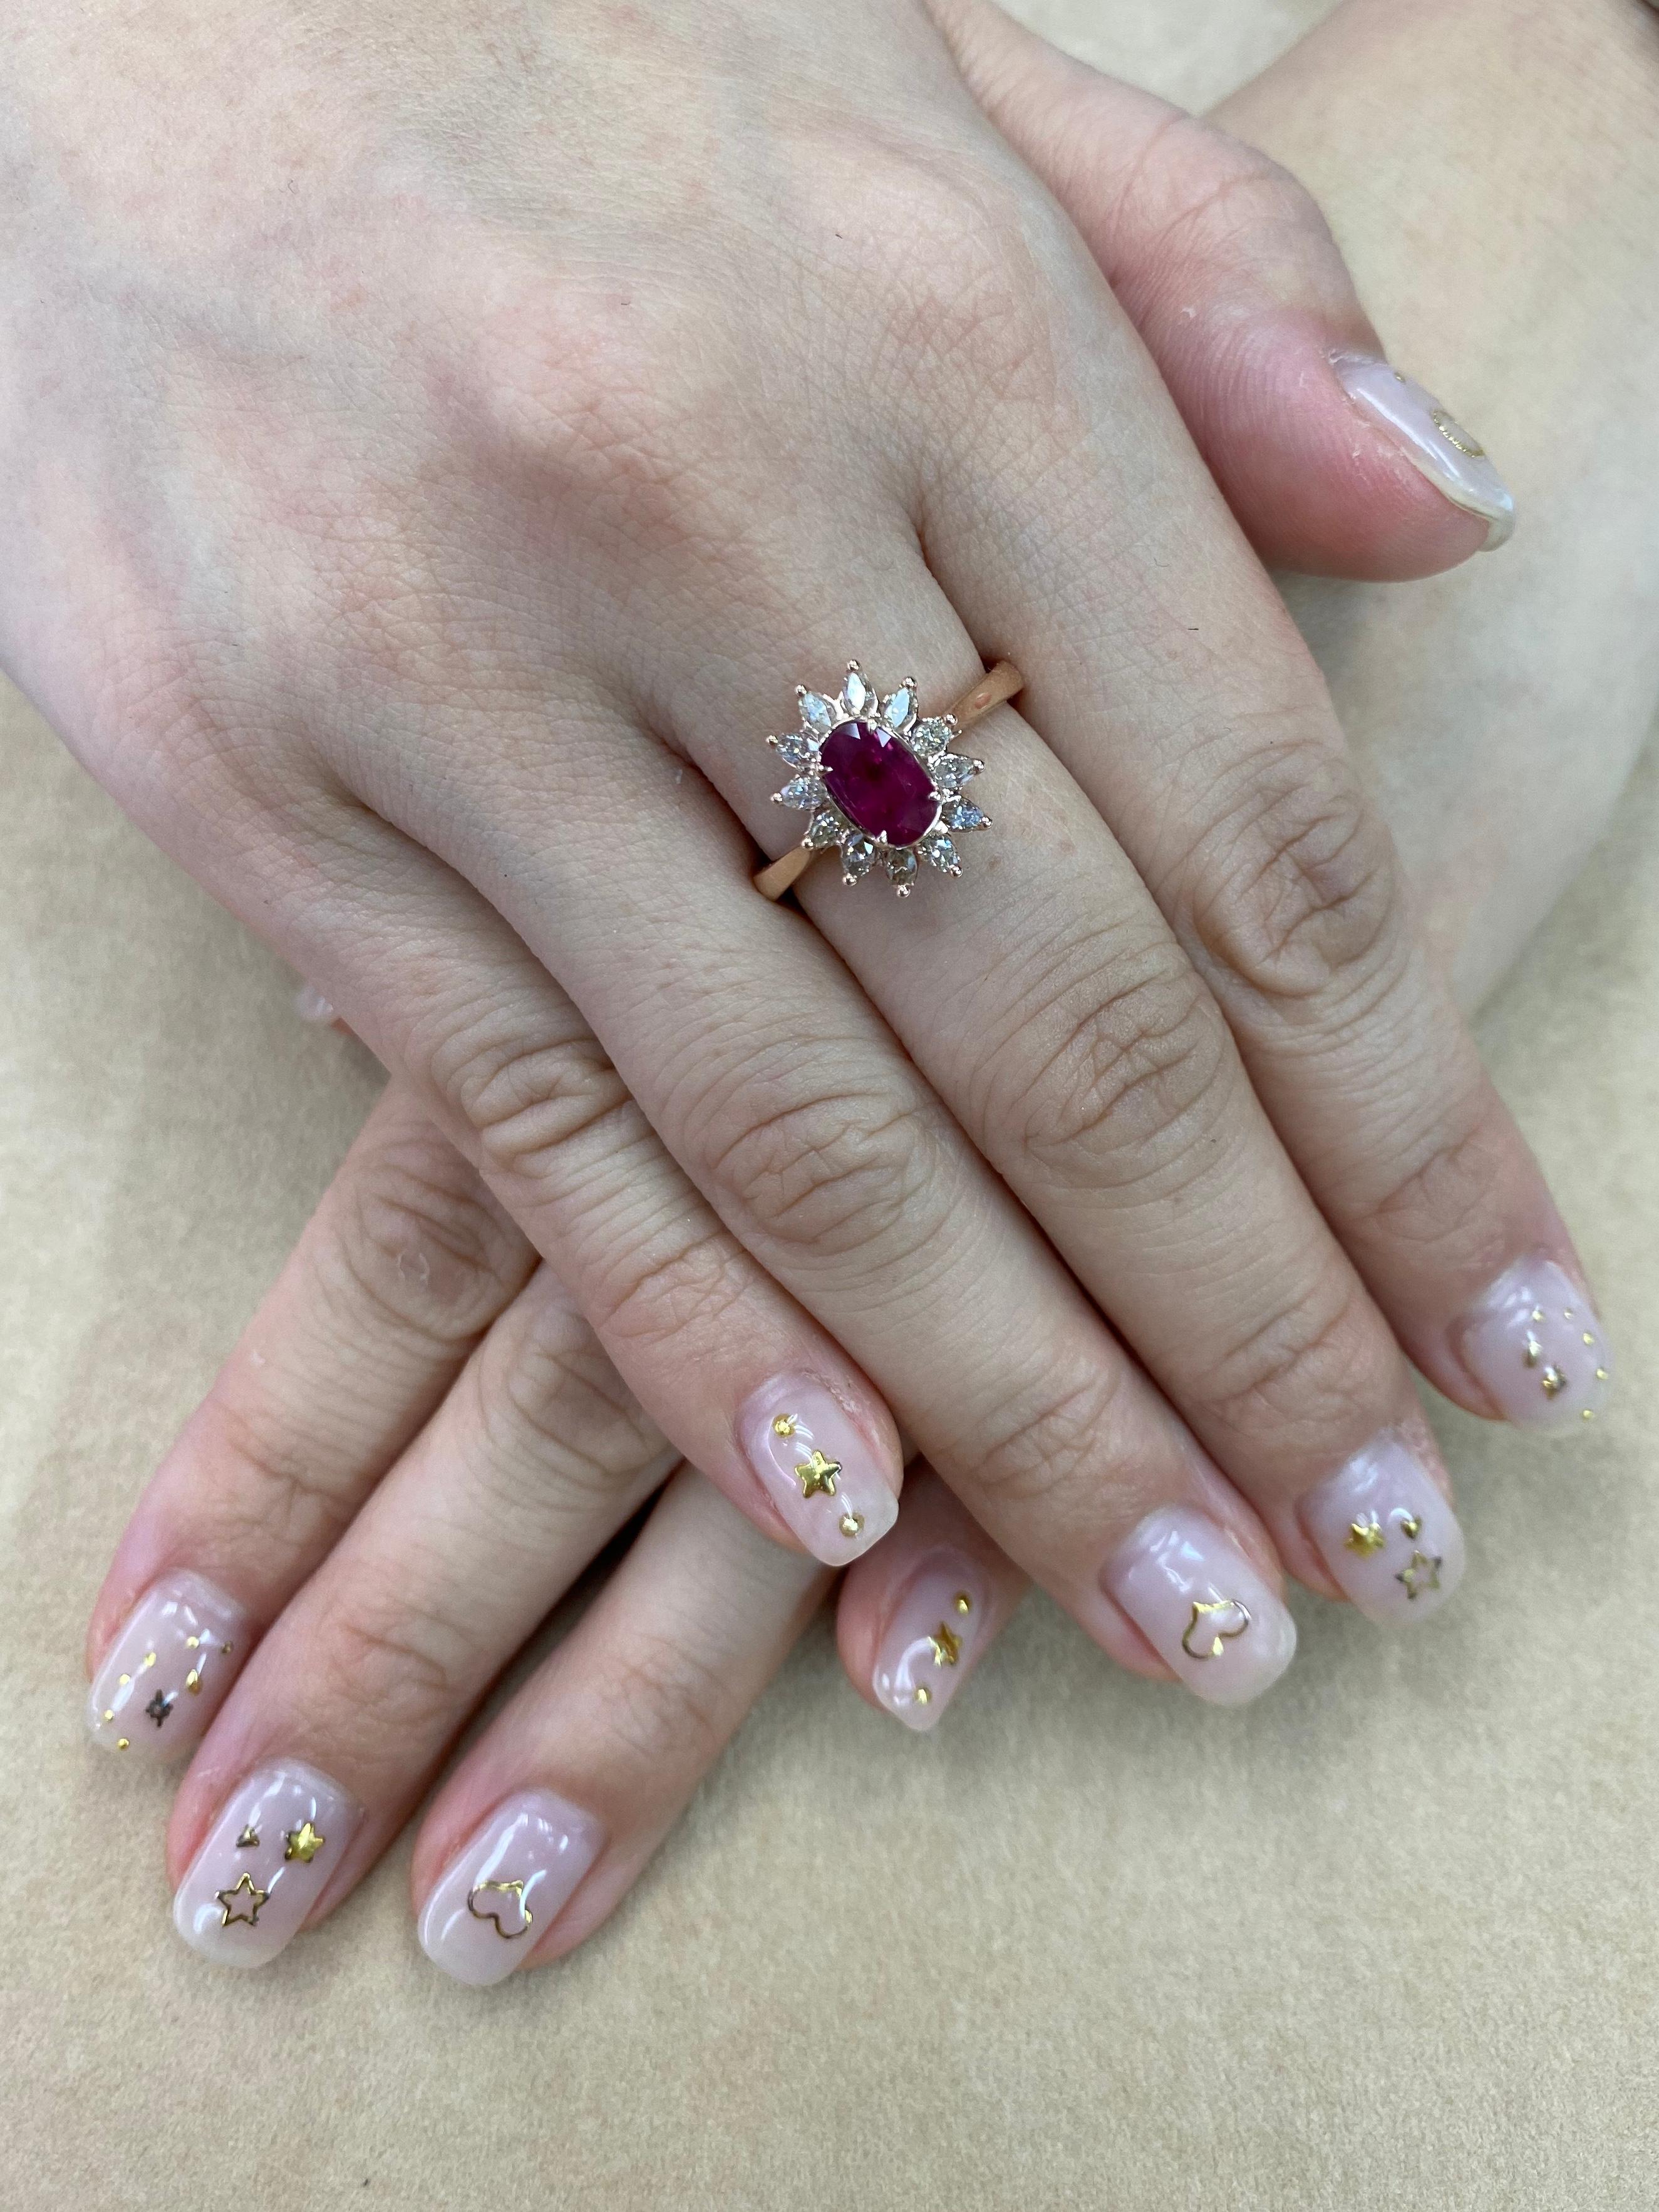 Here is a nice Burma Ruby and diamond flower cocktail ring. The nice red ruby is 1.14 cts with strong fluorescence under black light. The ring is set in 18k rose gold and marquise diamonds. Marquise diamonds totaling 0.49 carats. The photos does not